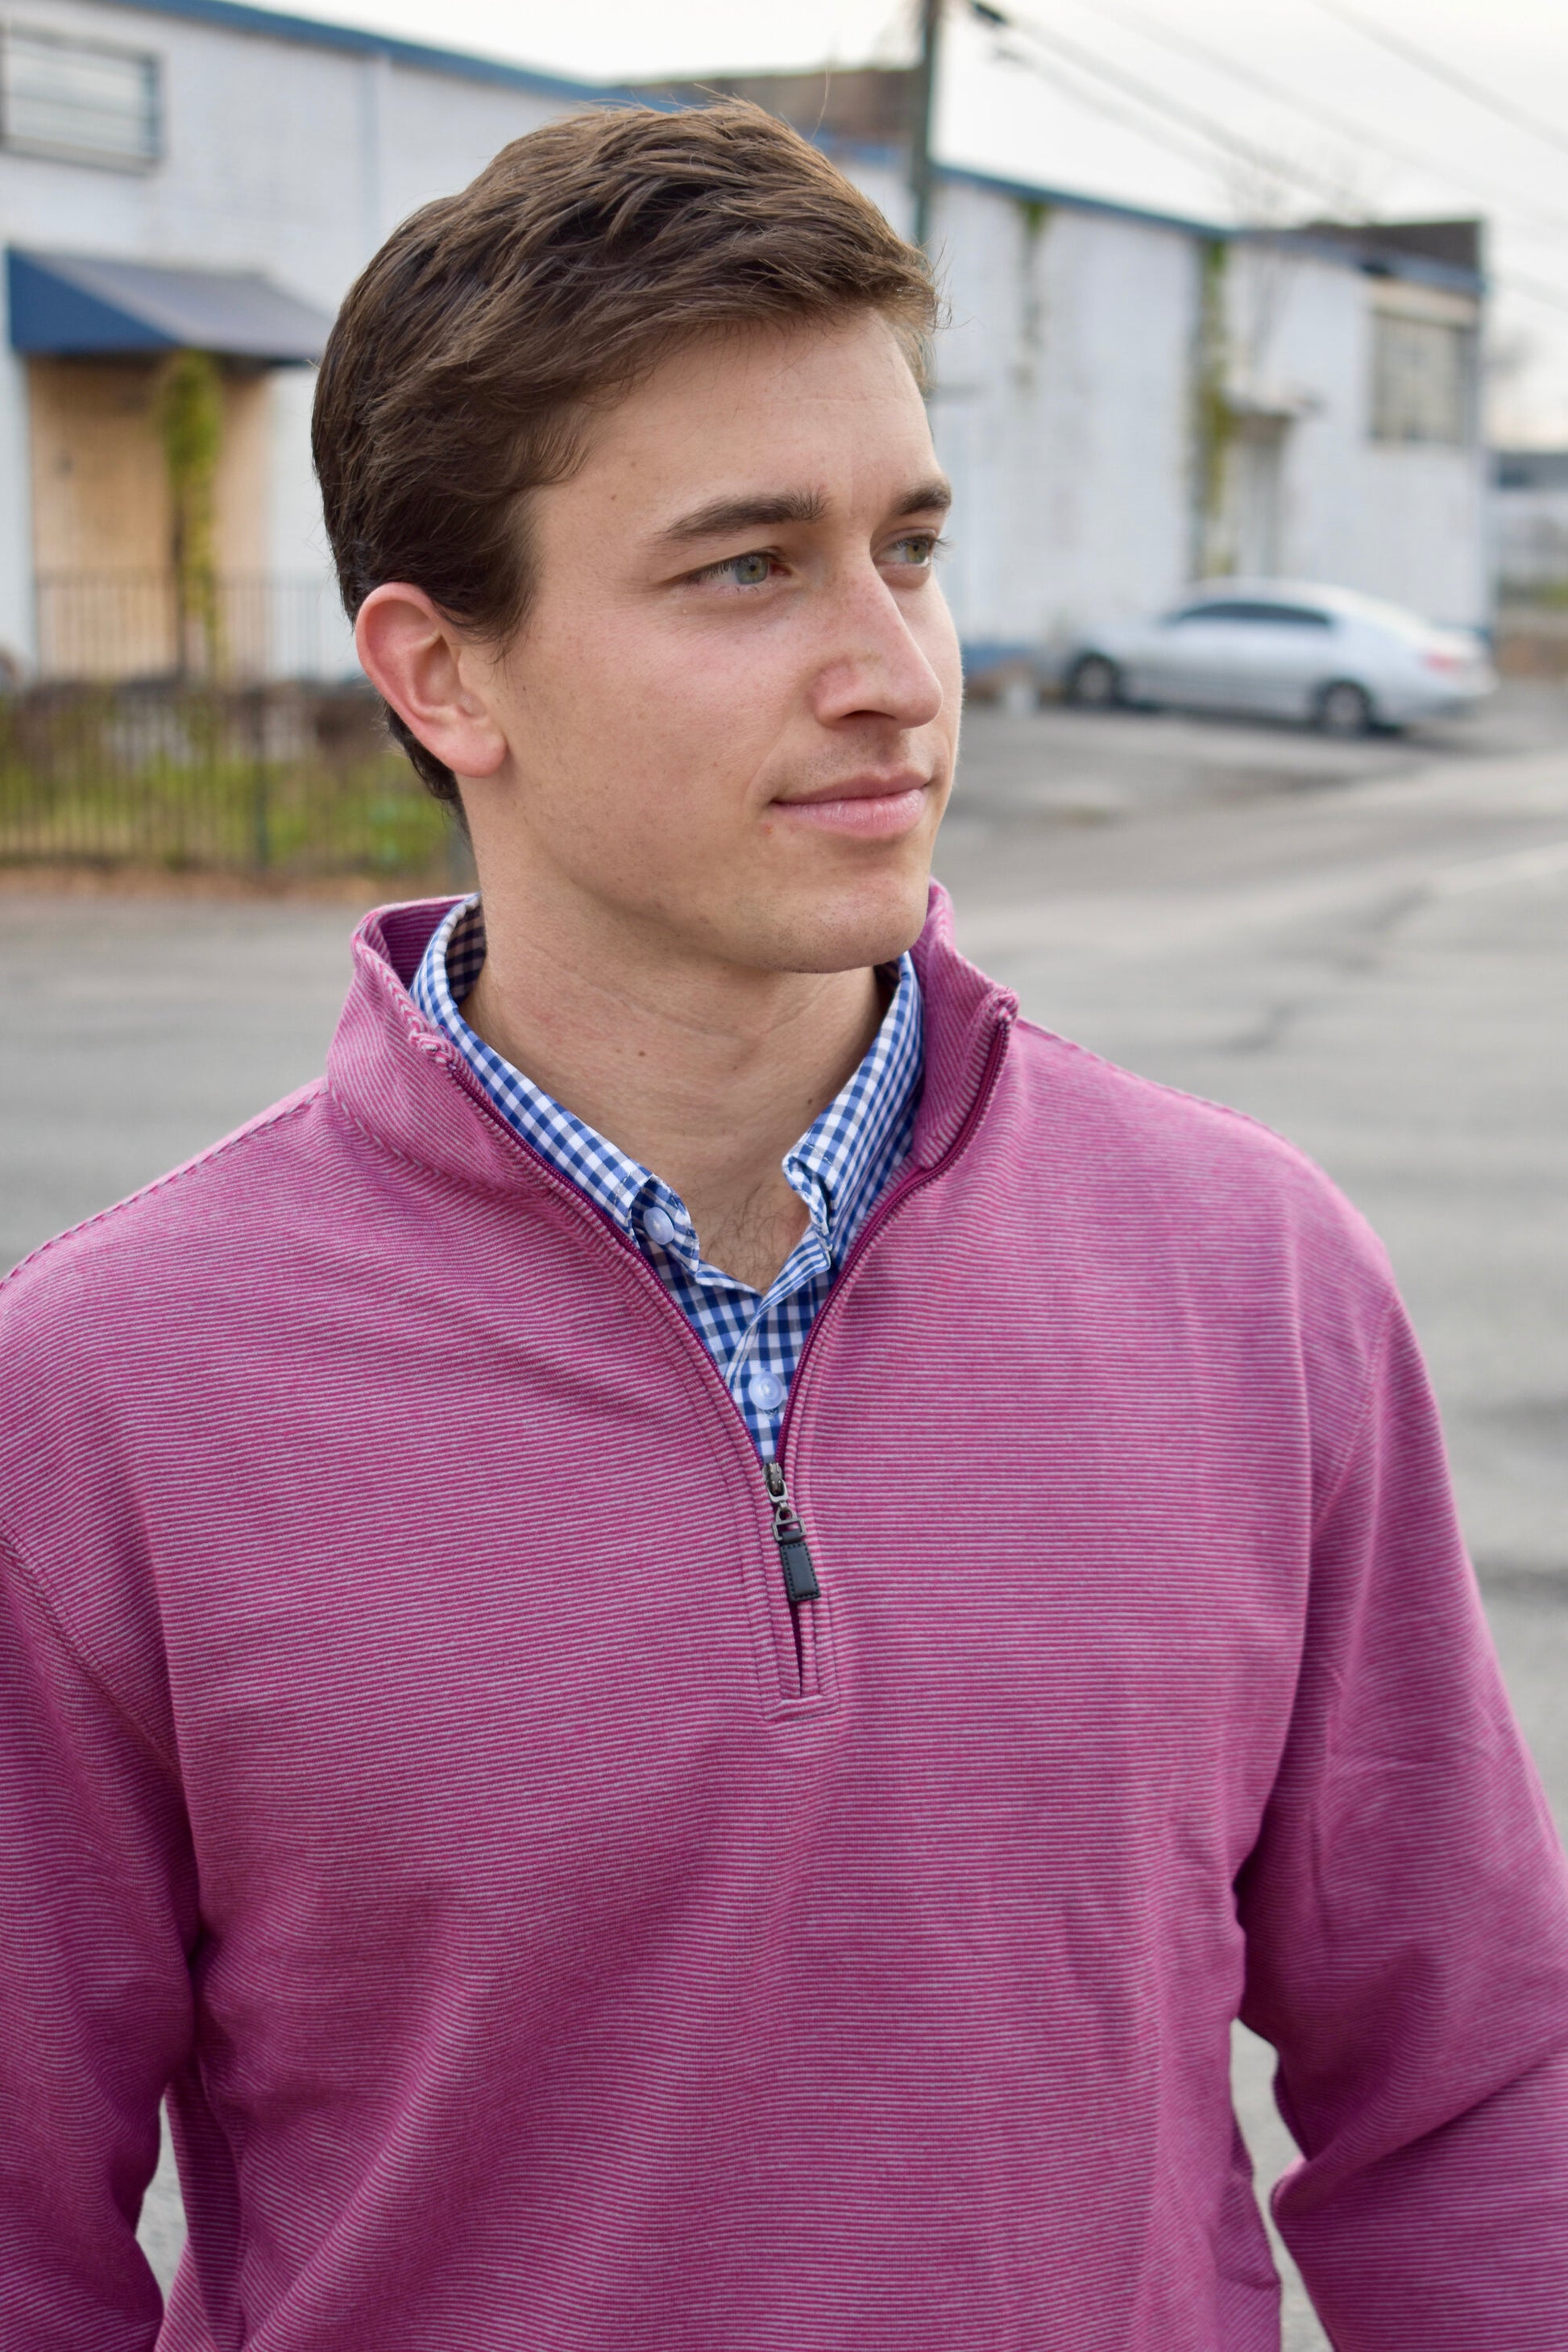 The Crimson Quarter Zip features a warm red and subtle silver stripe combination. It's breathability and stretch properties provide optimal mobility.